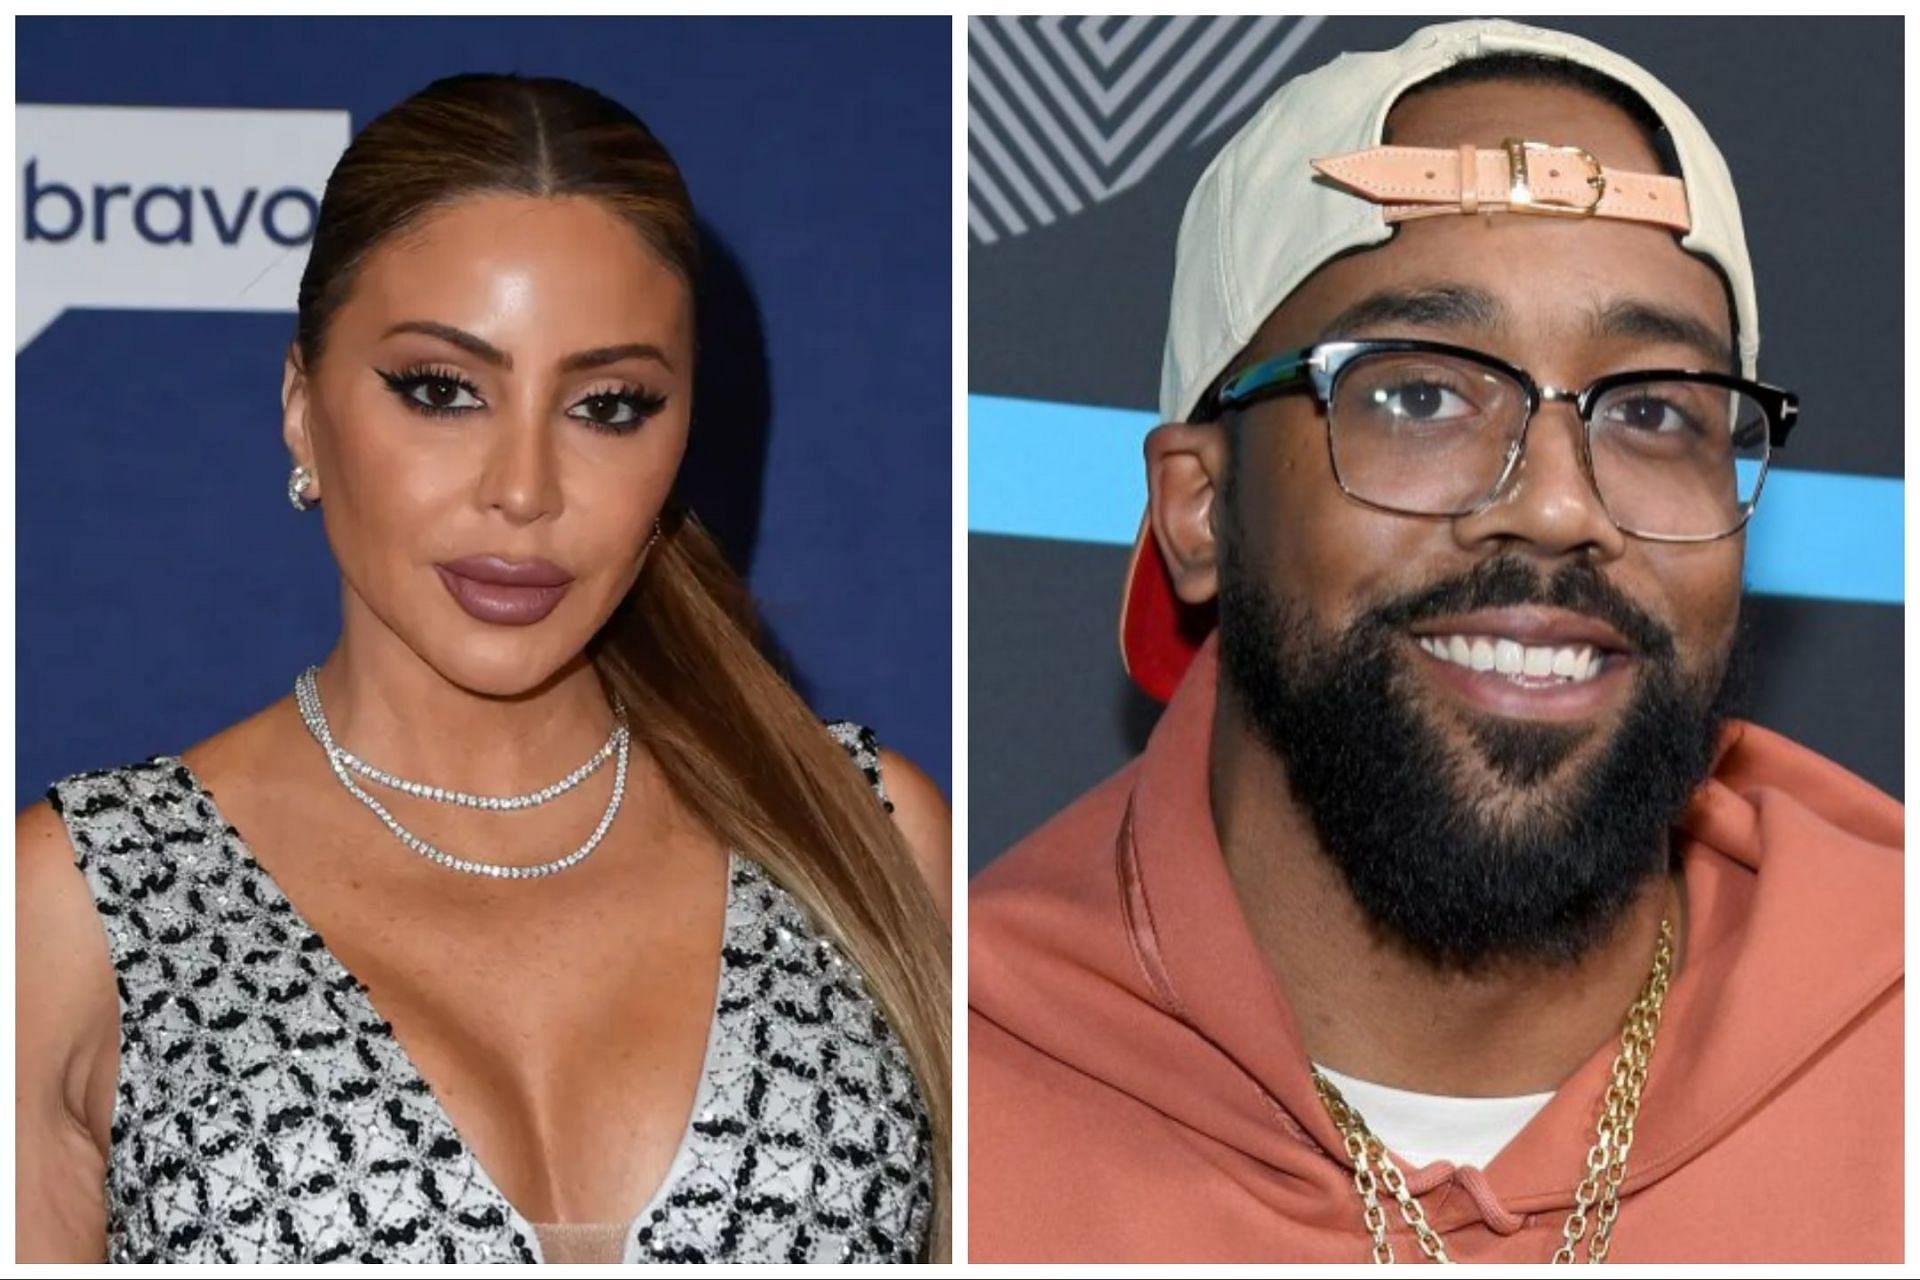 Larsa Pippen (left) and Marcus Jordan (right) are expected to start planning their wedding soon